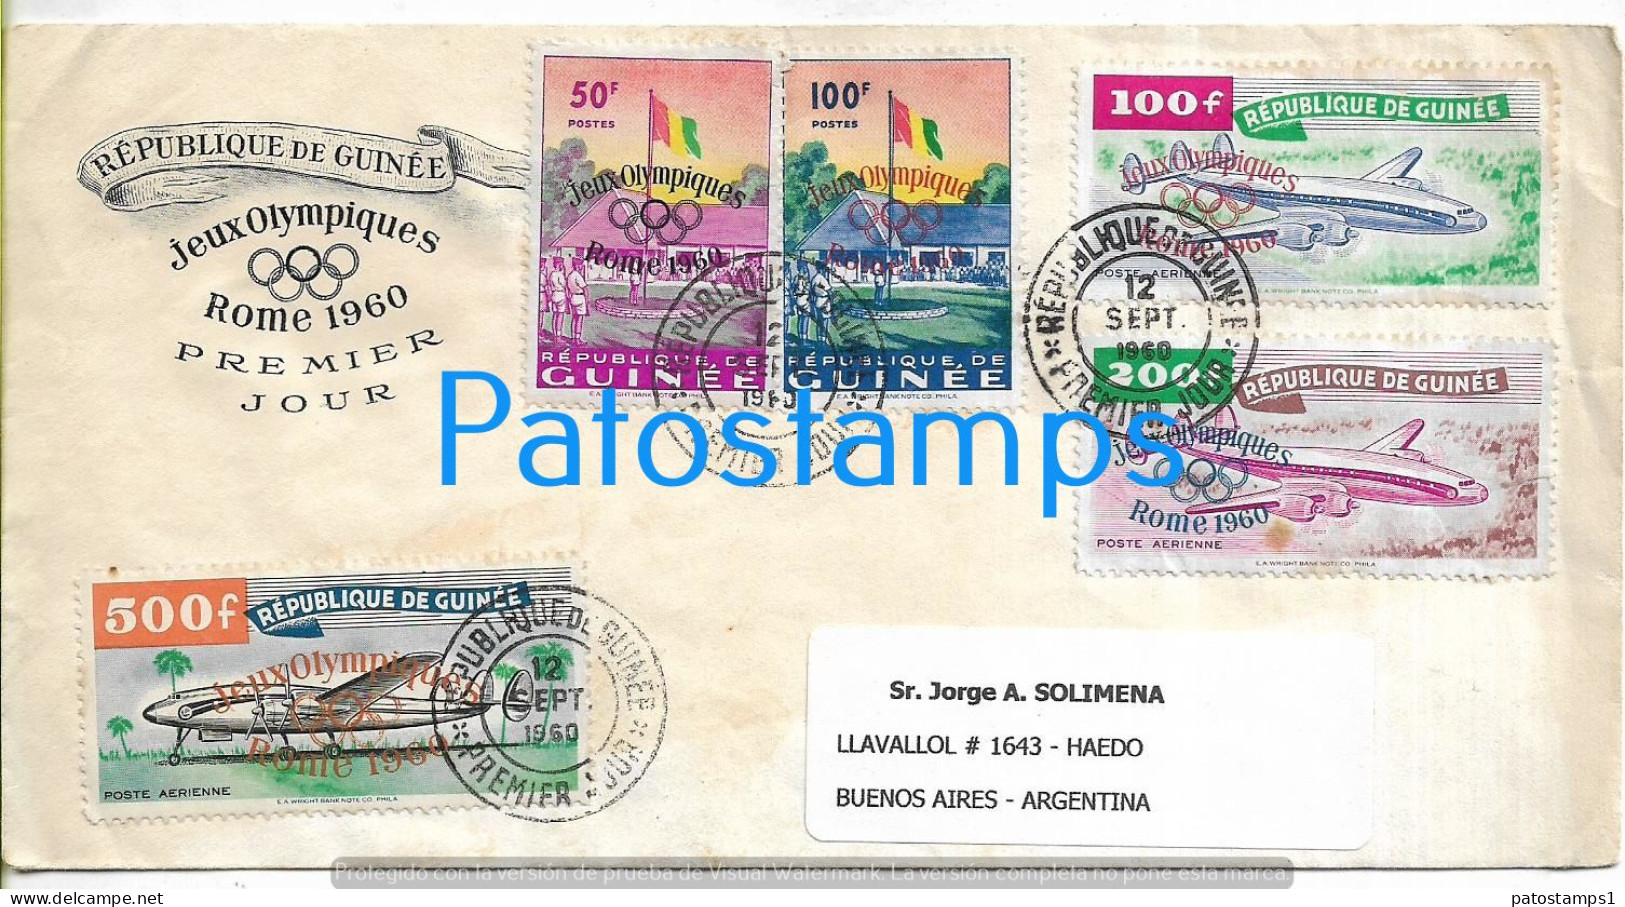 226331 AFRICA REPUBLIC GUINEE COVER CANCEL YEAR 1960 OLYMPIC GAMES CIRCULATED TO ARGENTINA NO POSTCARD - Altri - Africa